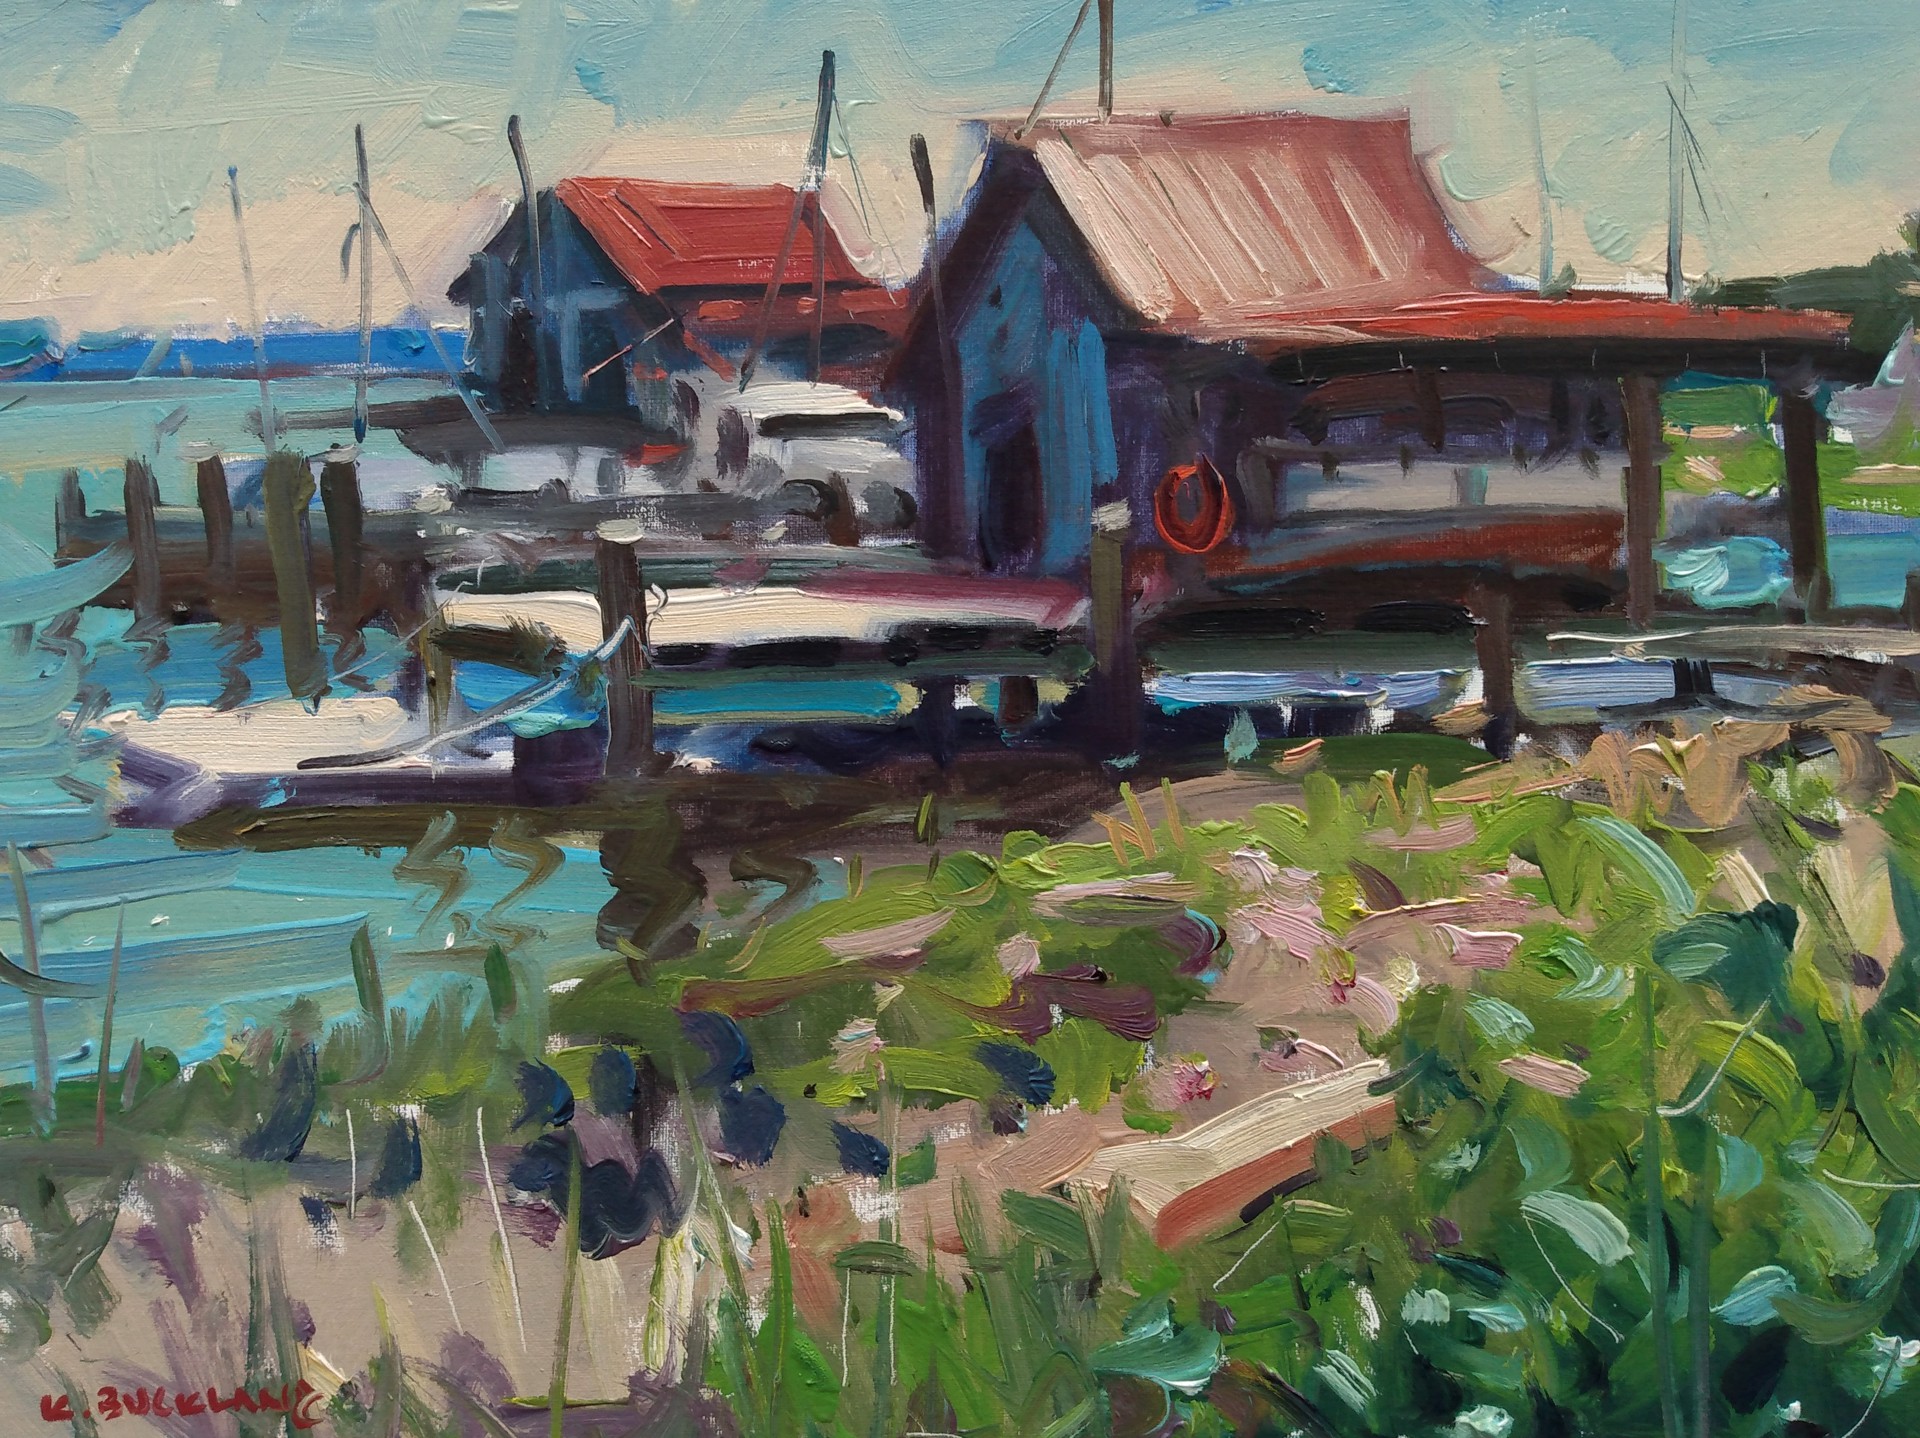 "The Oyster Shack" original oil painting by Kyle Buckland